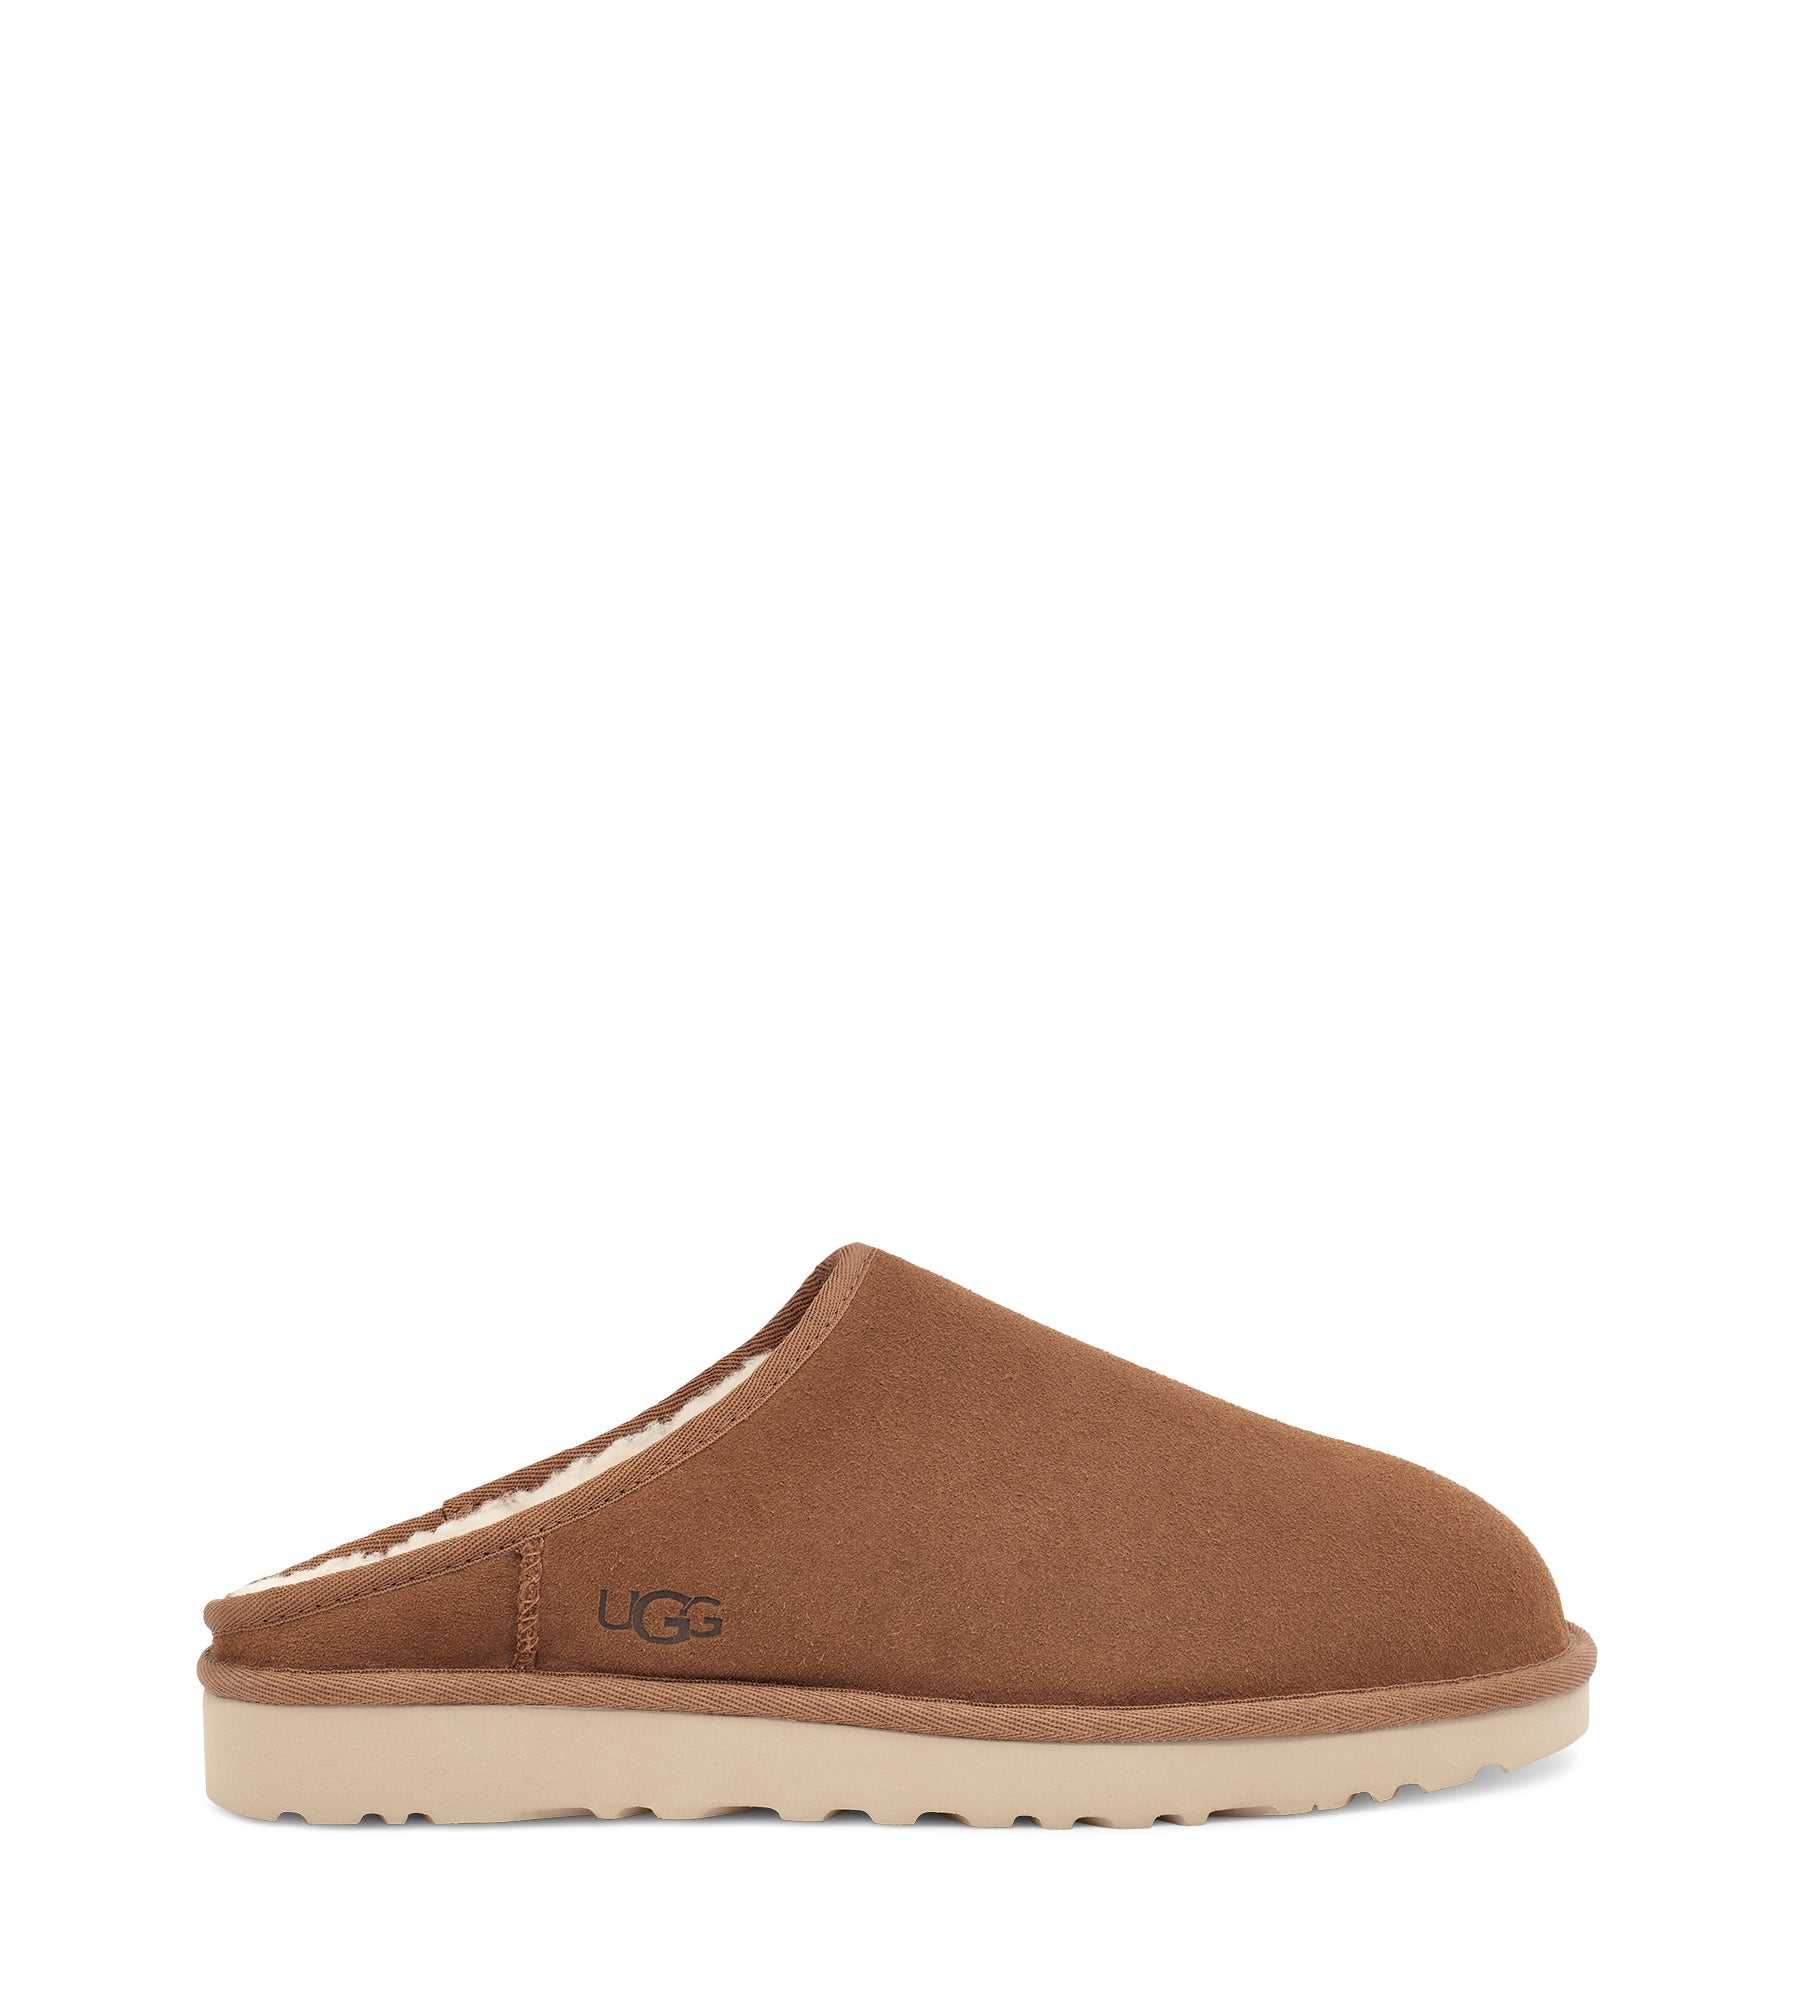 An effortless take on the icon with the same rich suede and soft sheepskin, the new Classic Slip-On offers easy entry and a laidback look. Lined in the signature UGGplush blend of upcycled wool and plant-based lyocell, it's finished with a Treadlite by UGG outsole for grip and cushioning.